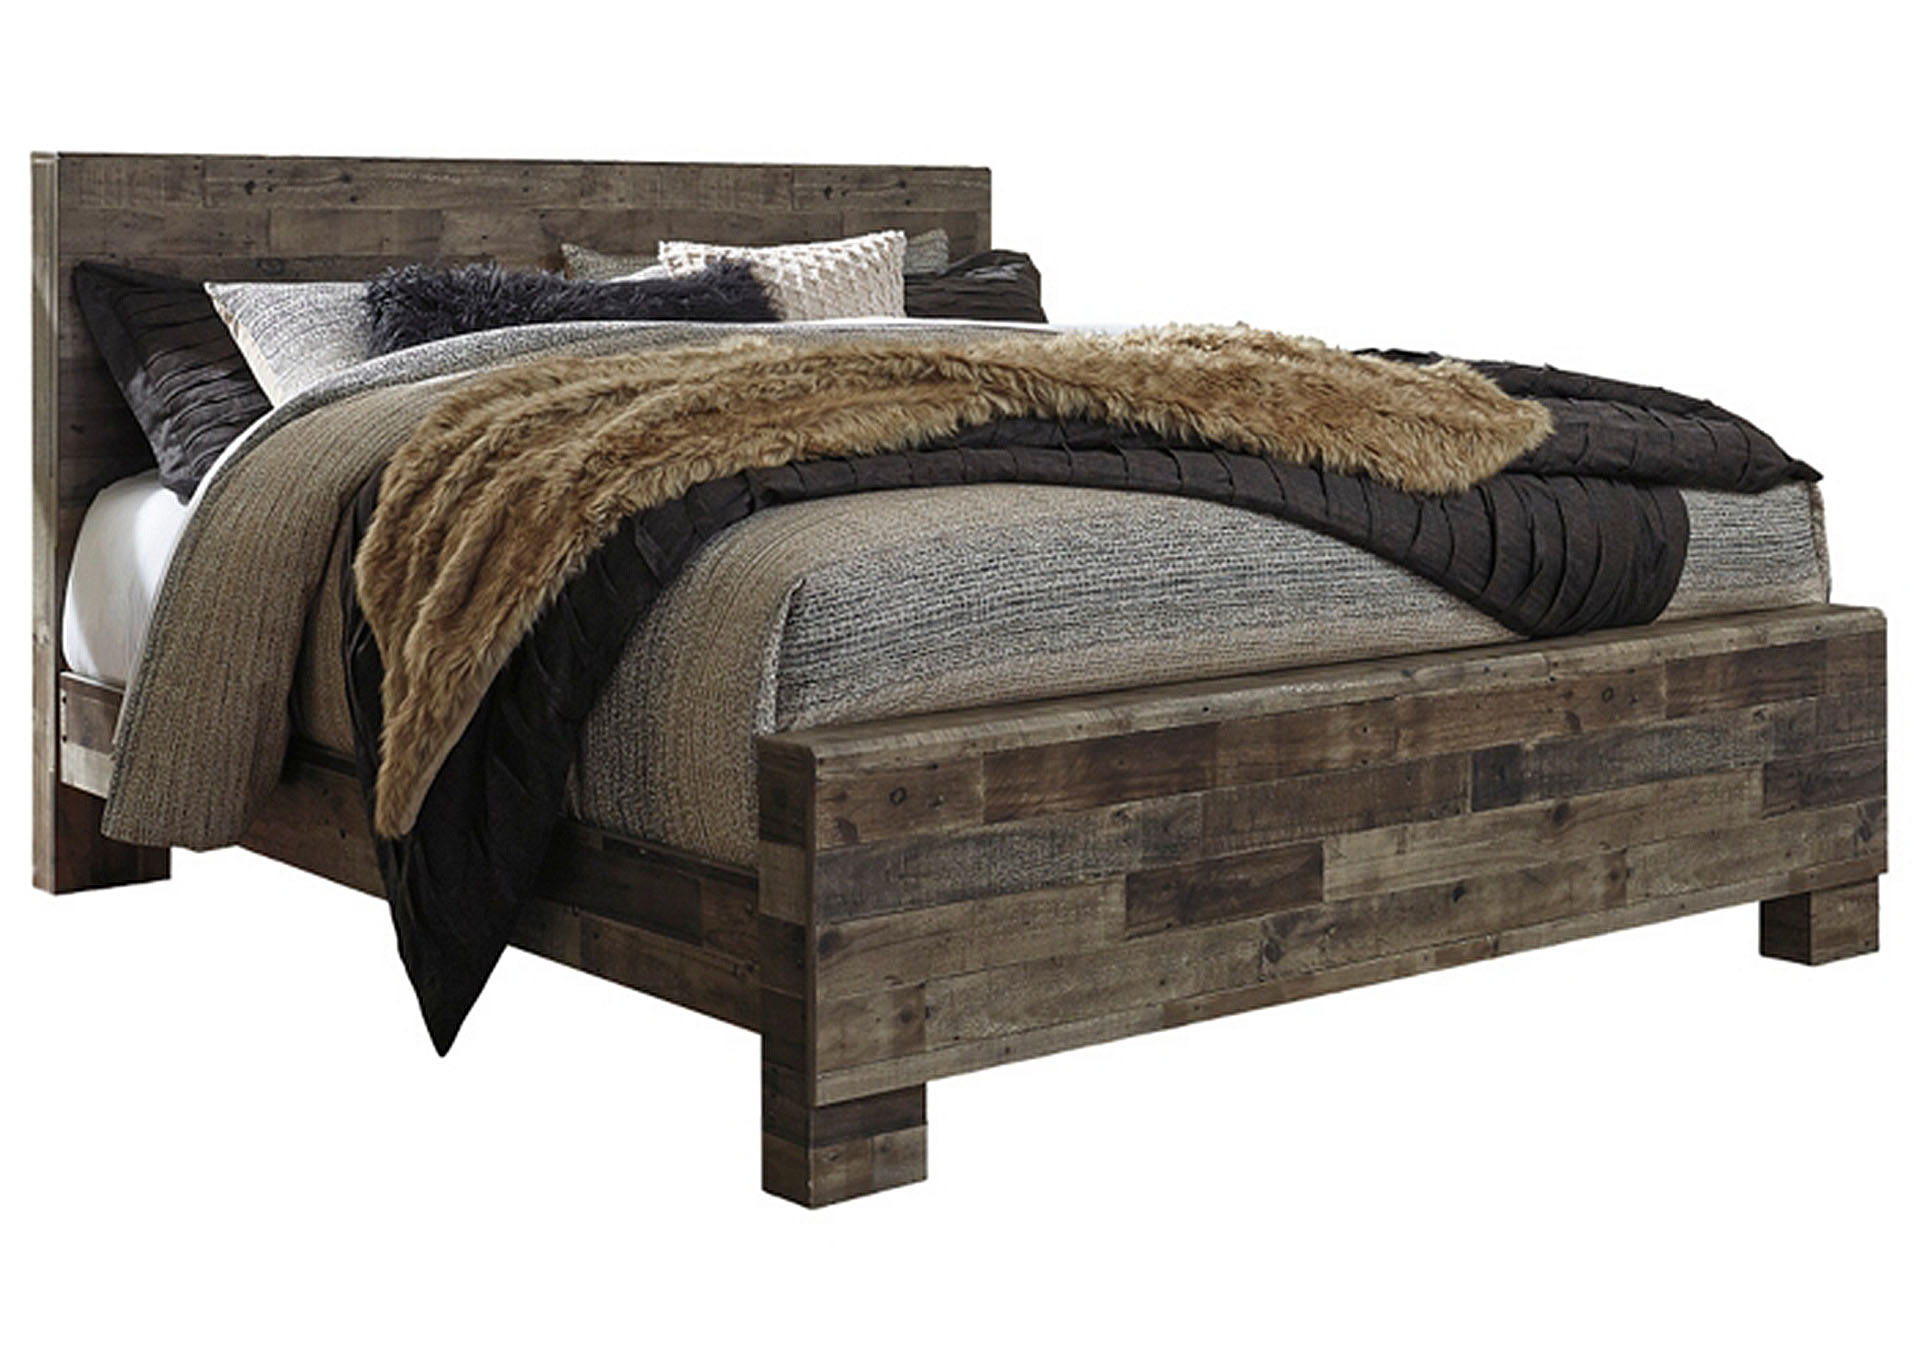 Son King Panel Bed Ivan Smith, King Panel Bed